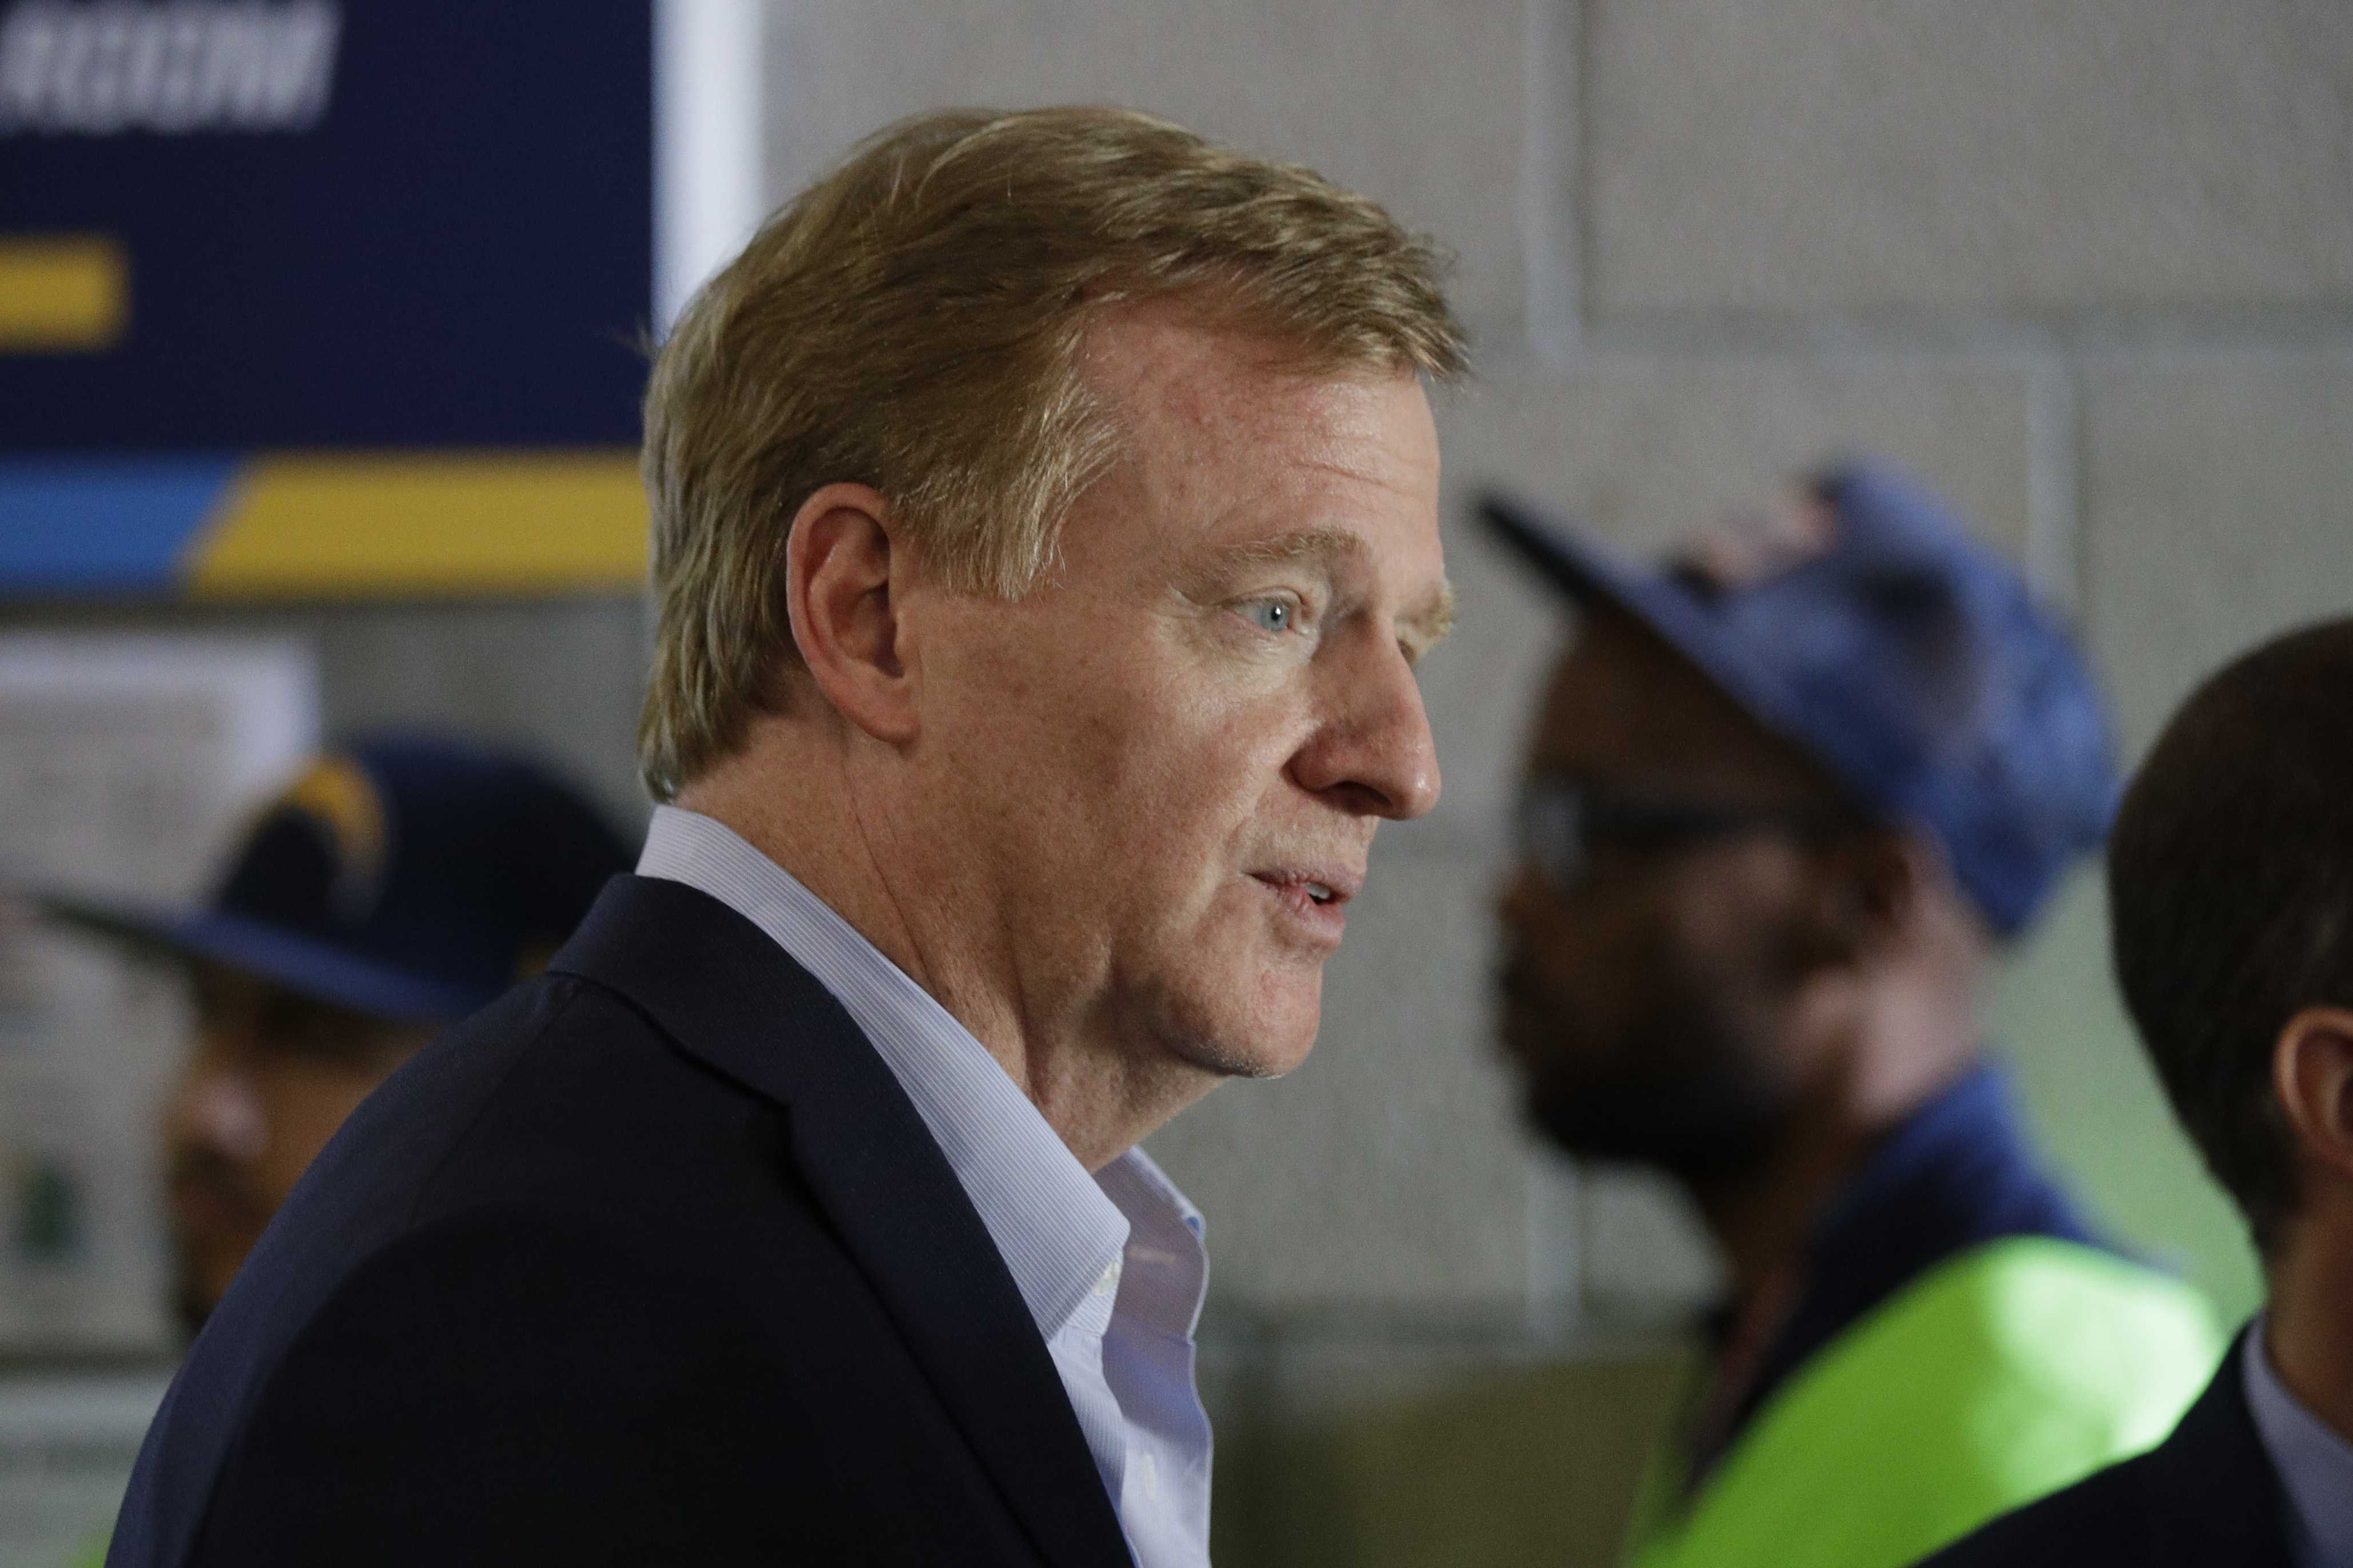 NFL commissioner to teams: 'Everyone should stand' for anthem